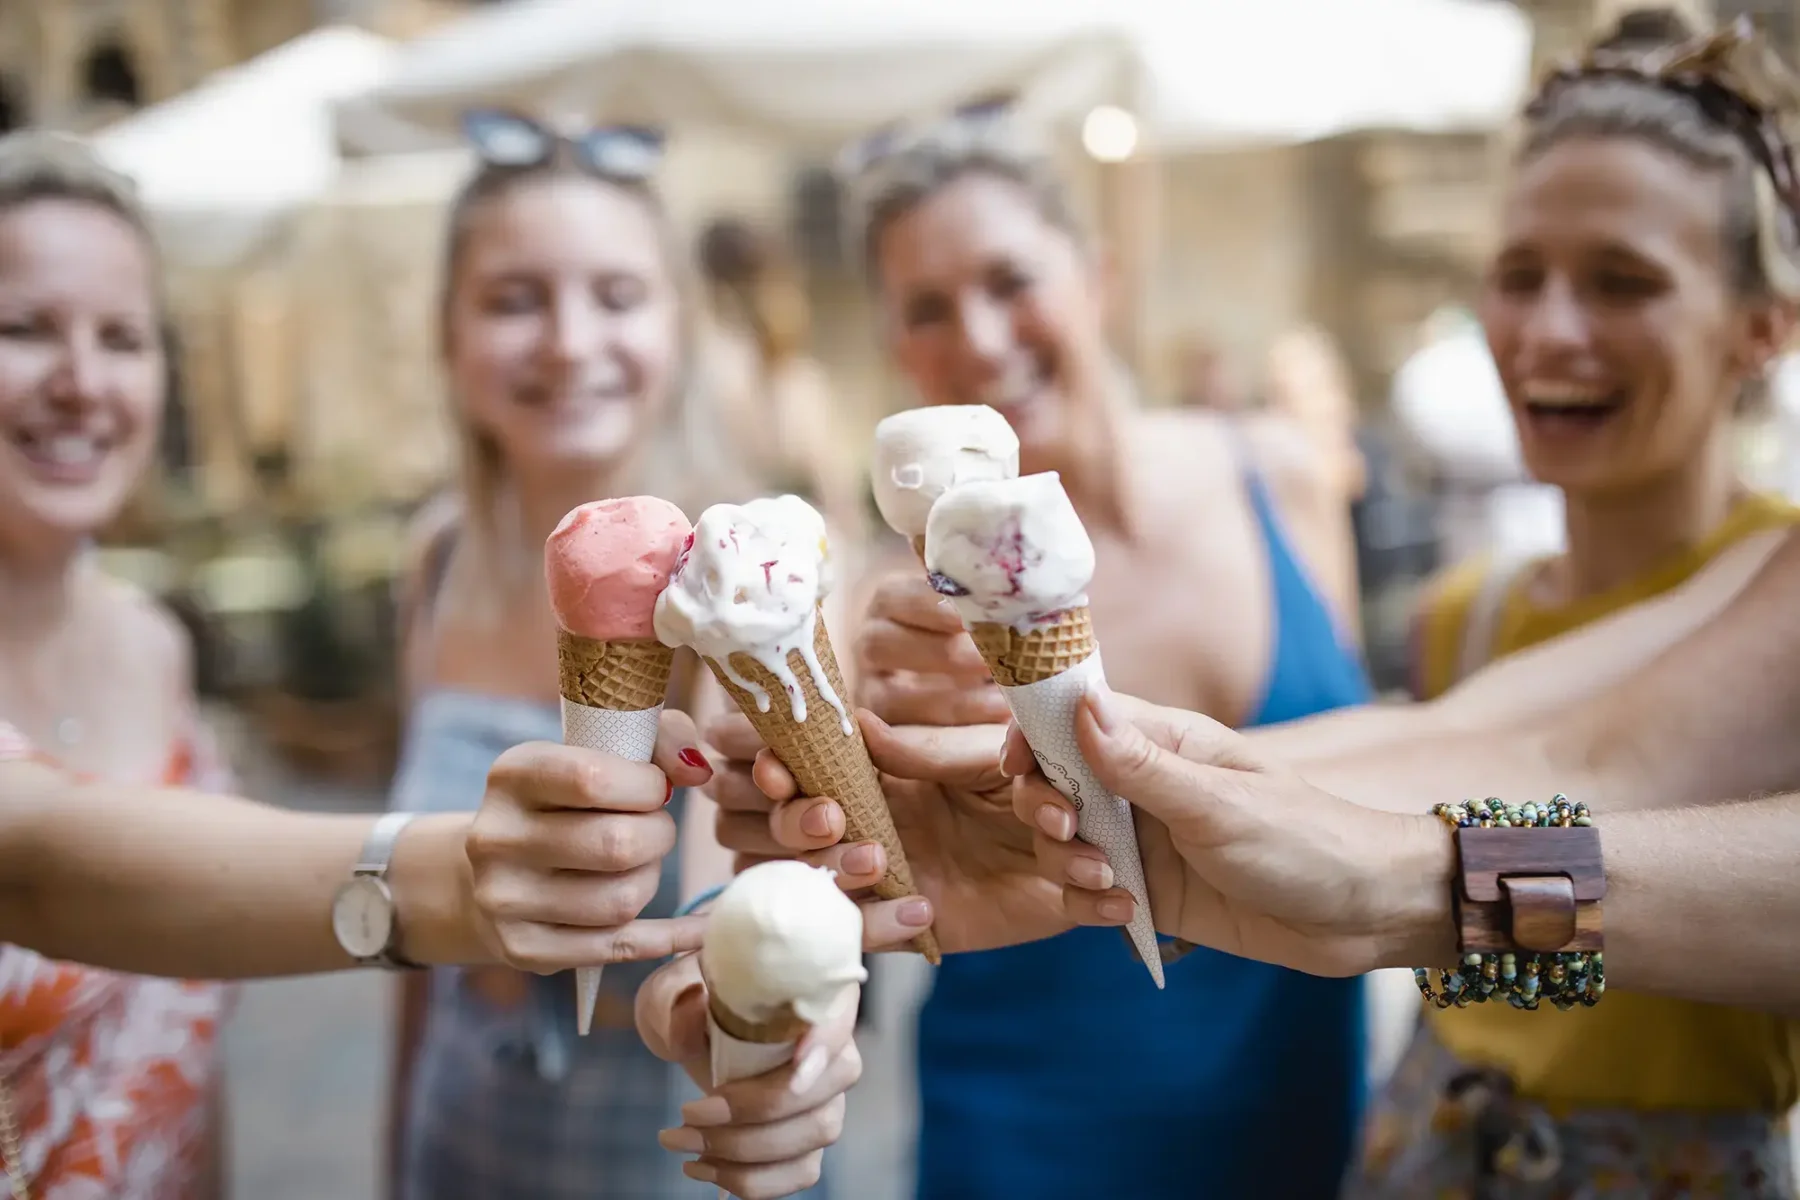 Friends in an outdoor market touching ice cream cones together in a circle